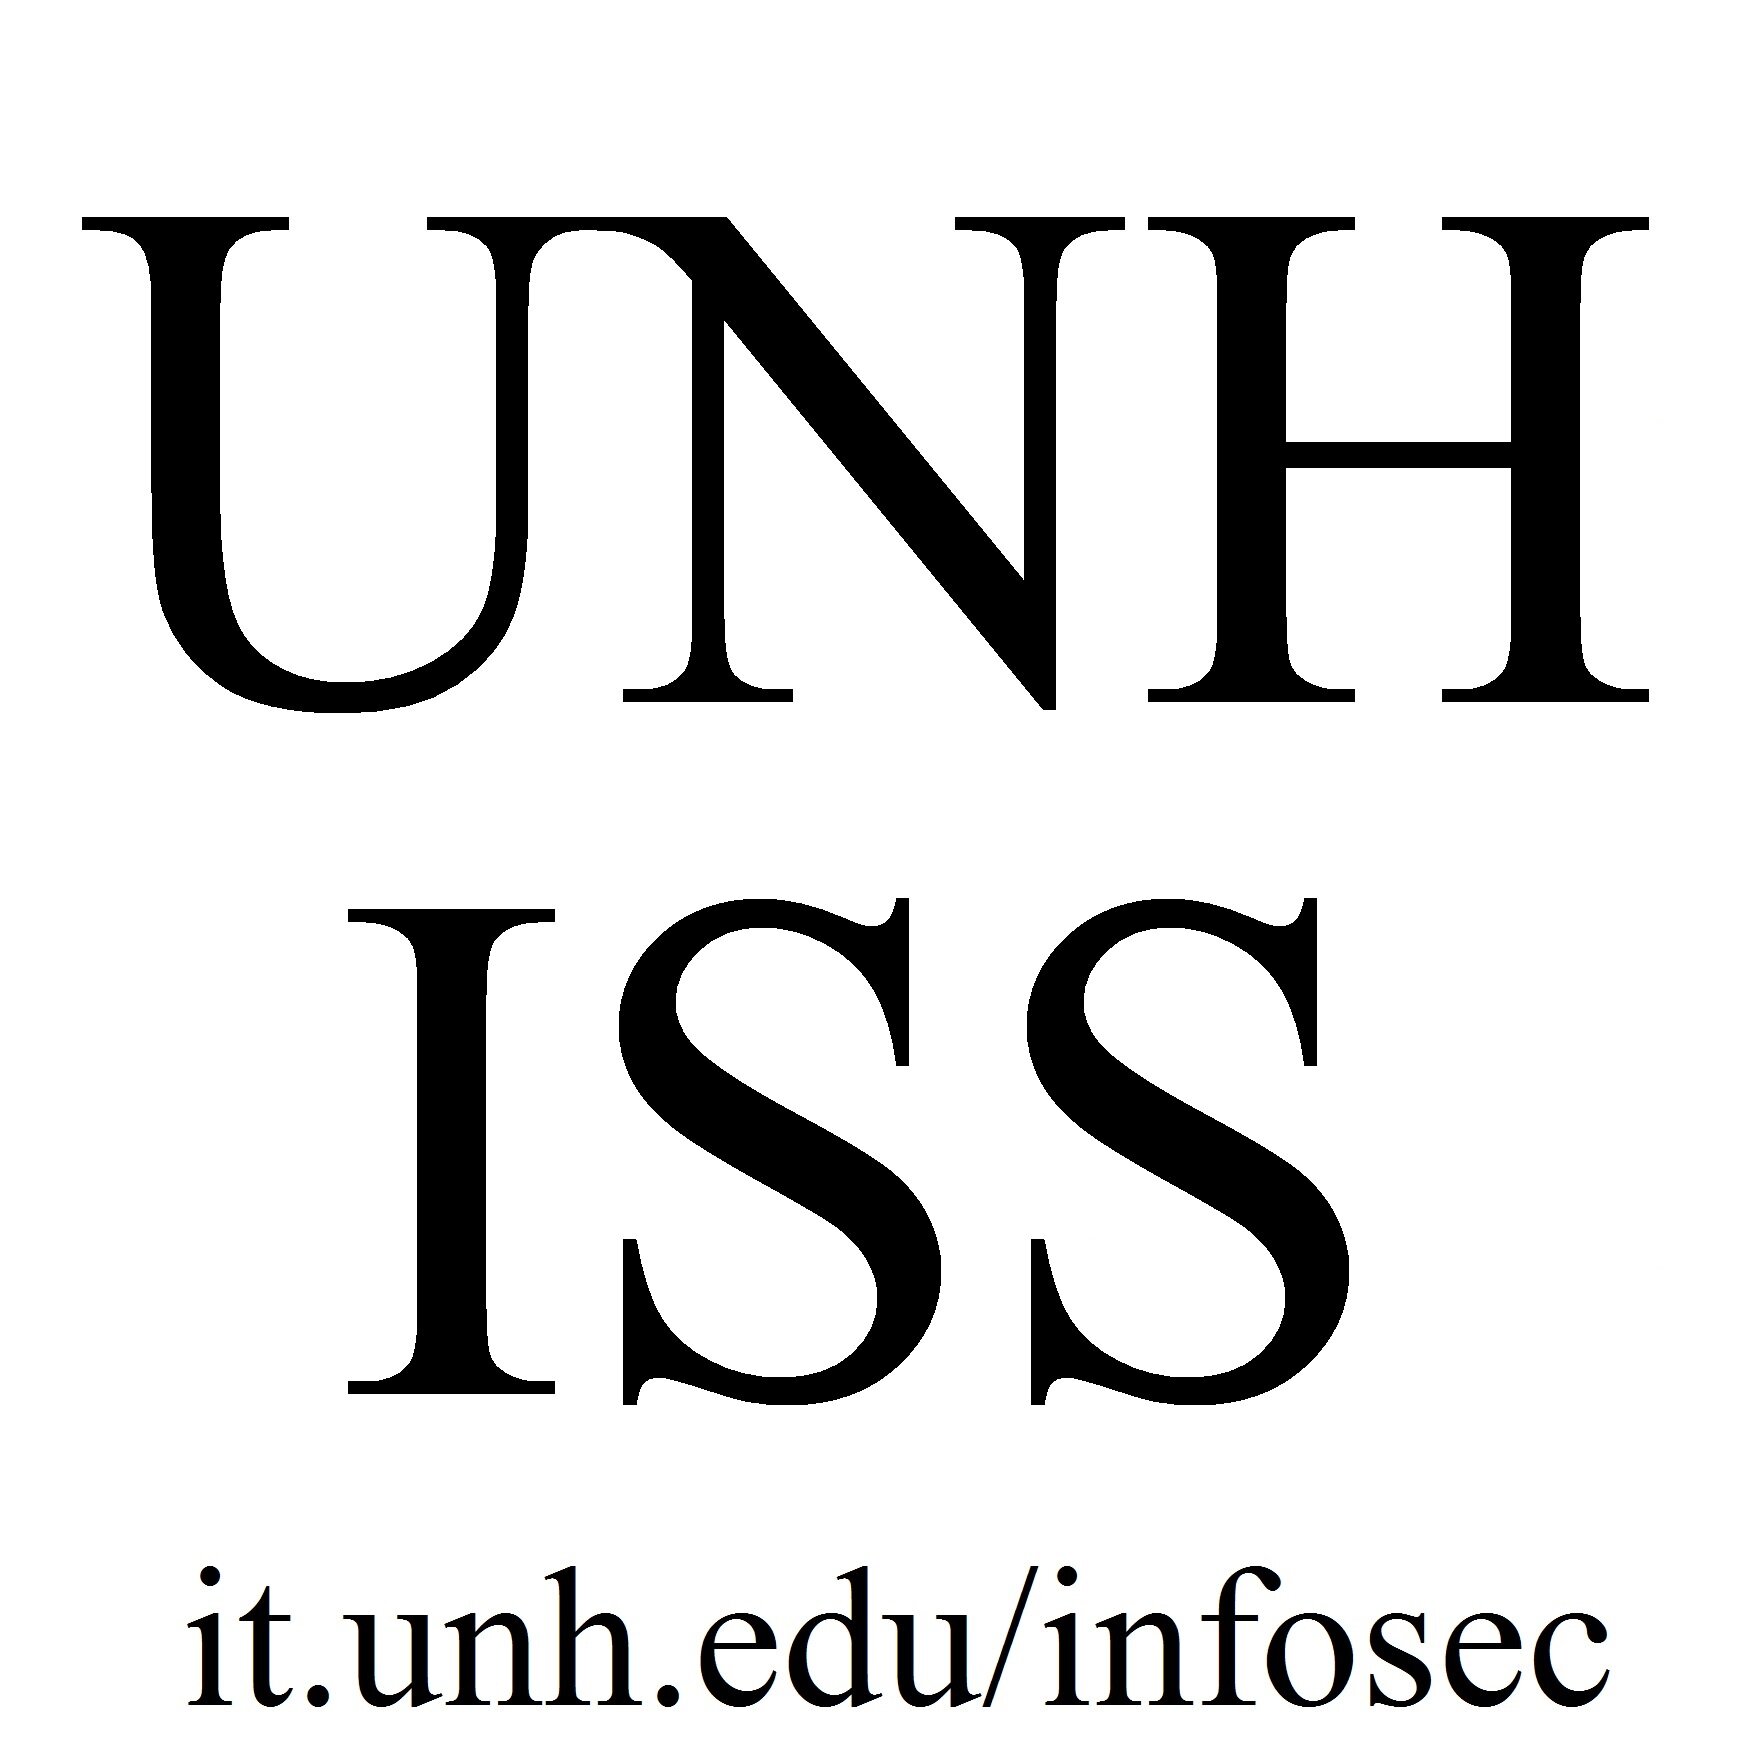 UNH Information Security Services helps you to protect your online privacy as well as the university's information technology systems.